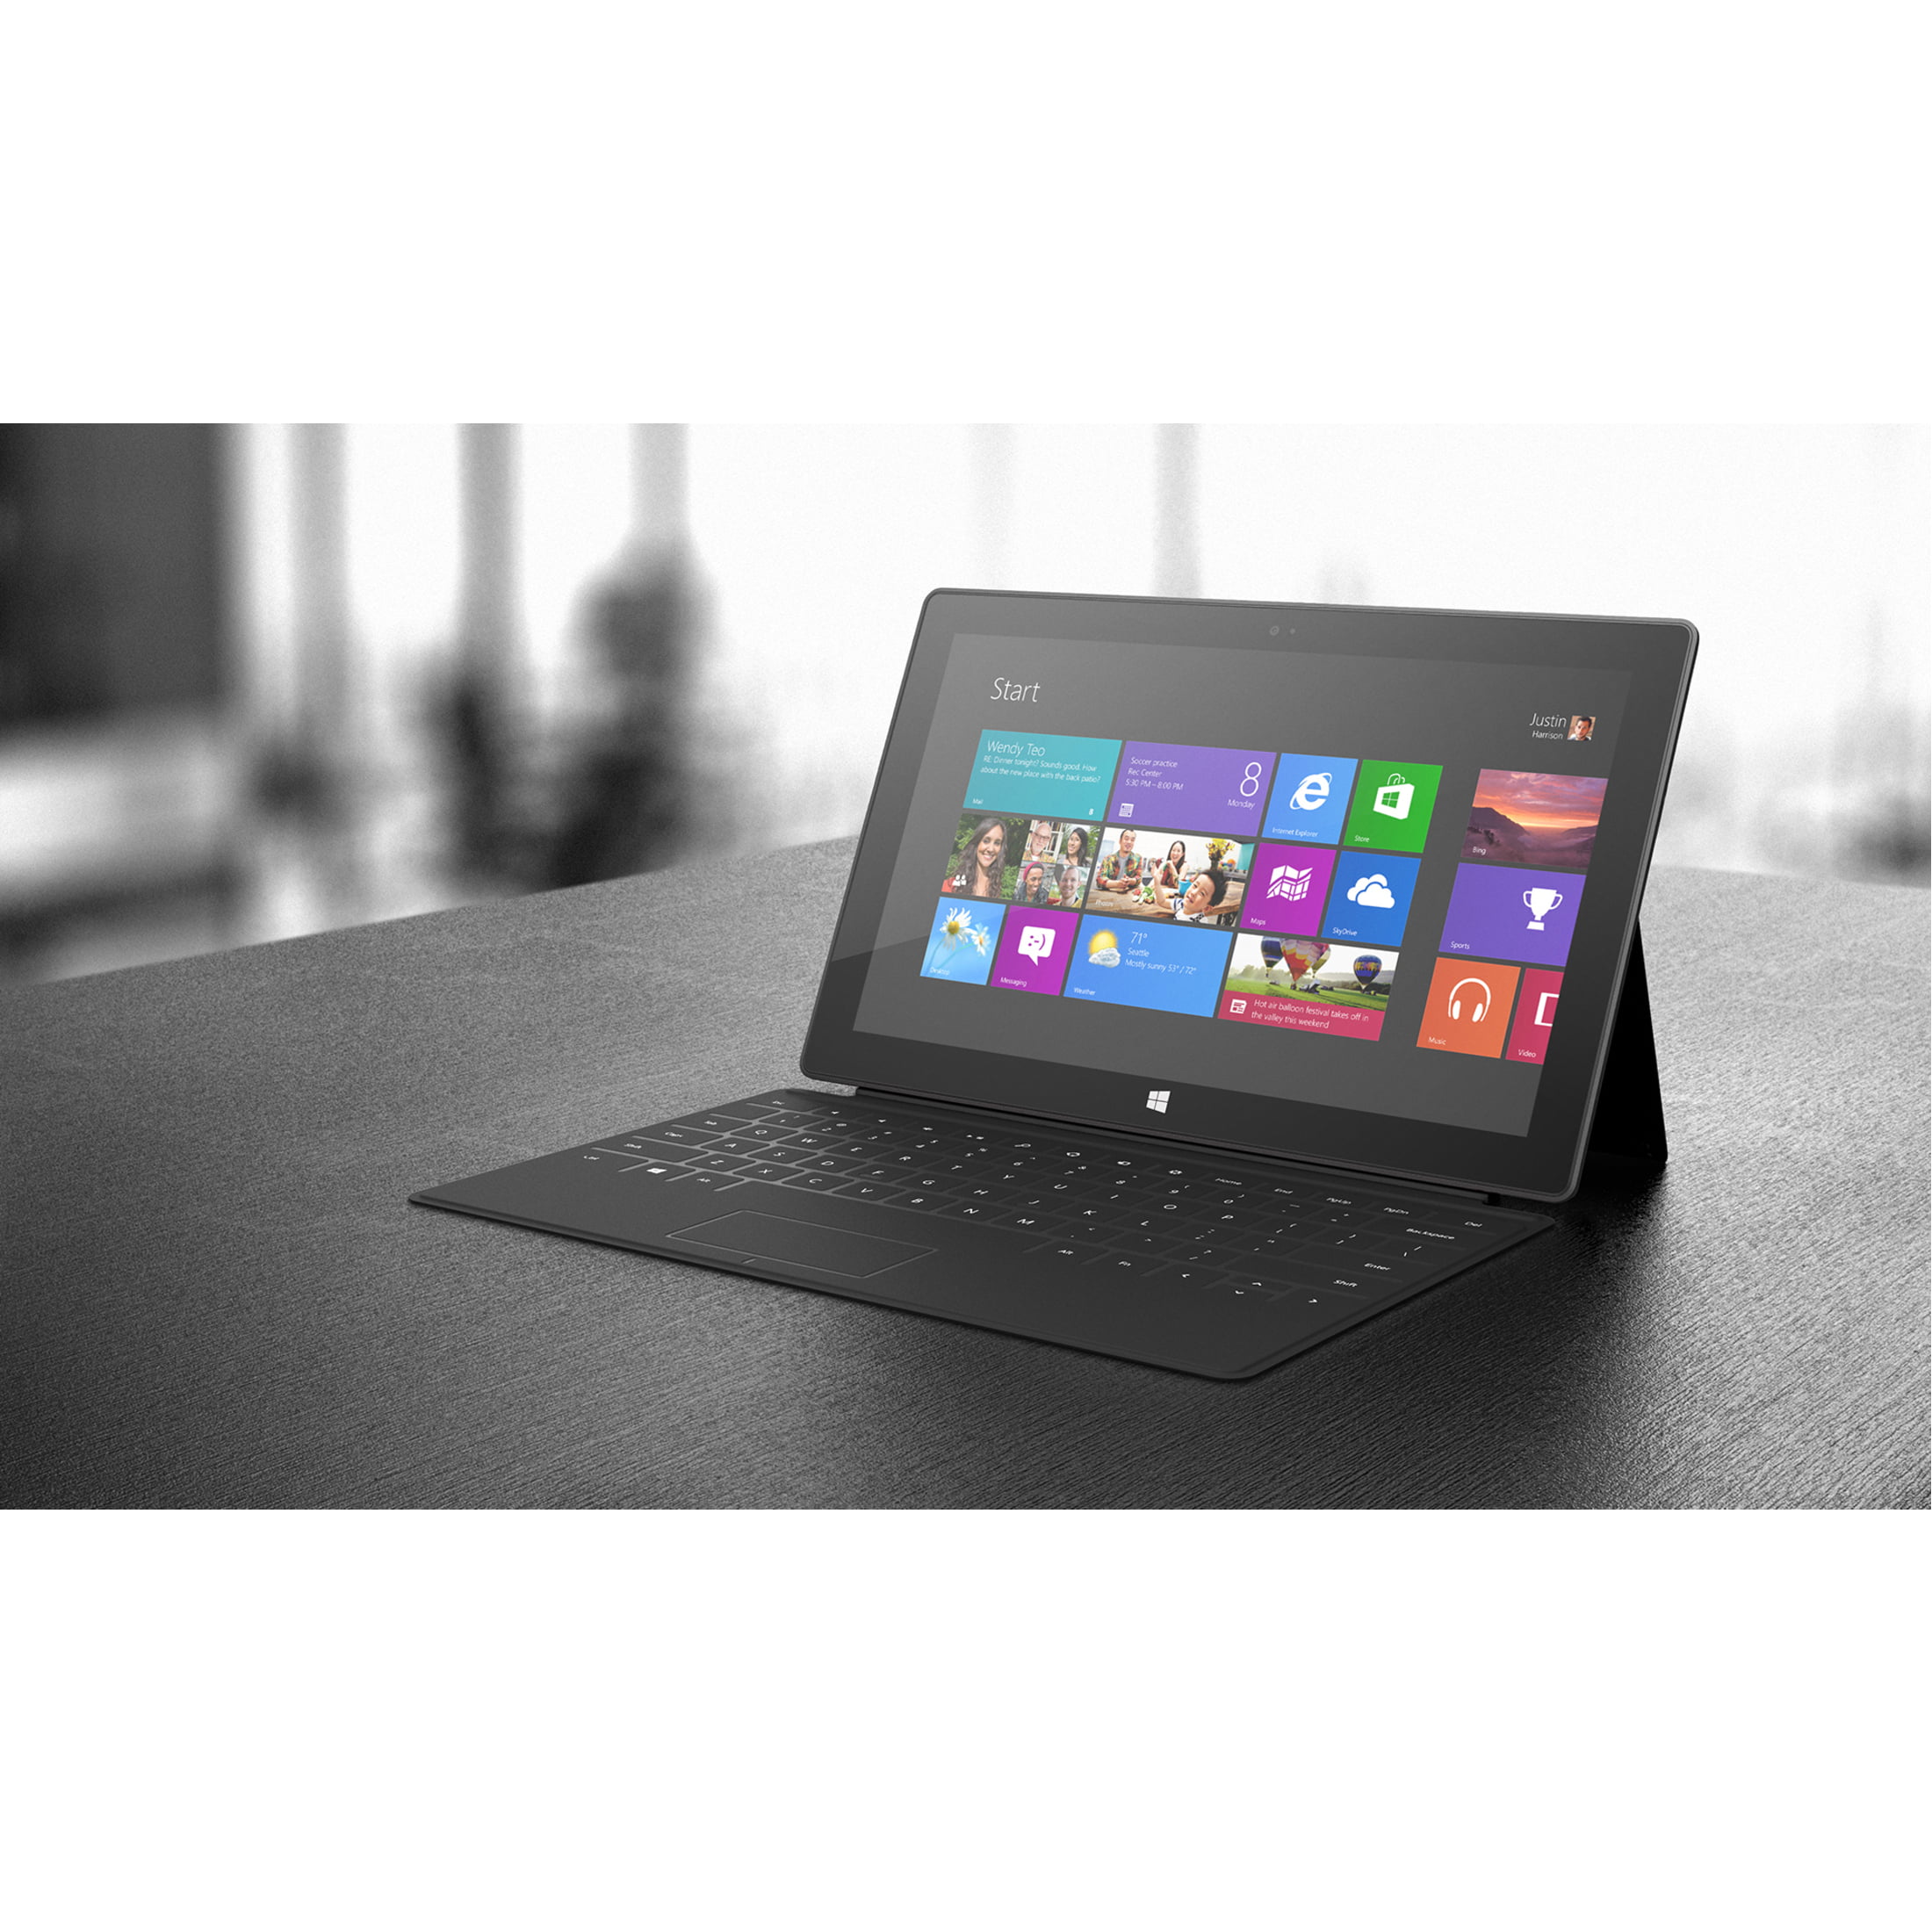 Microsoft Surface RT Tablet, 10.6